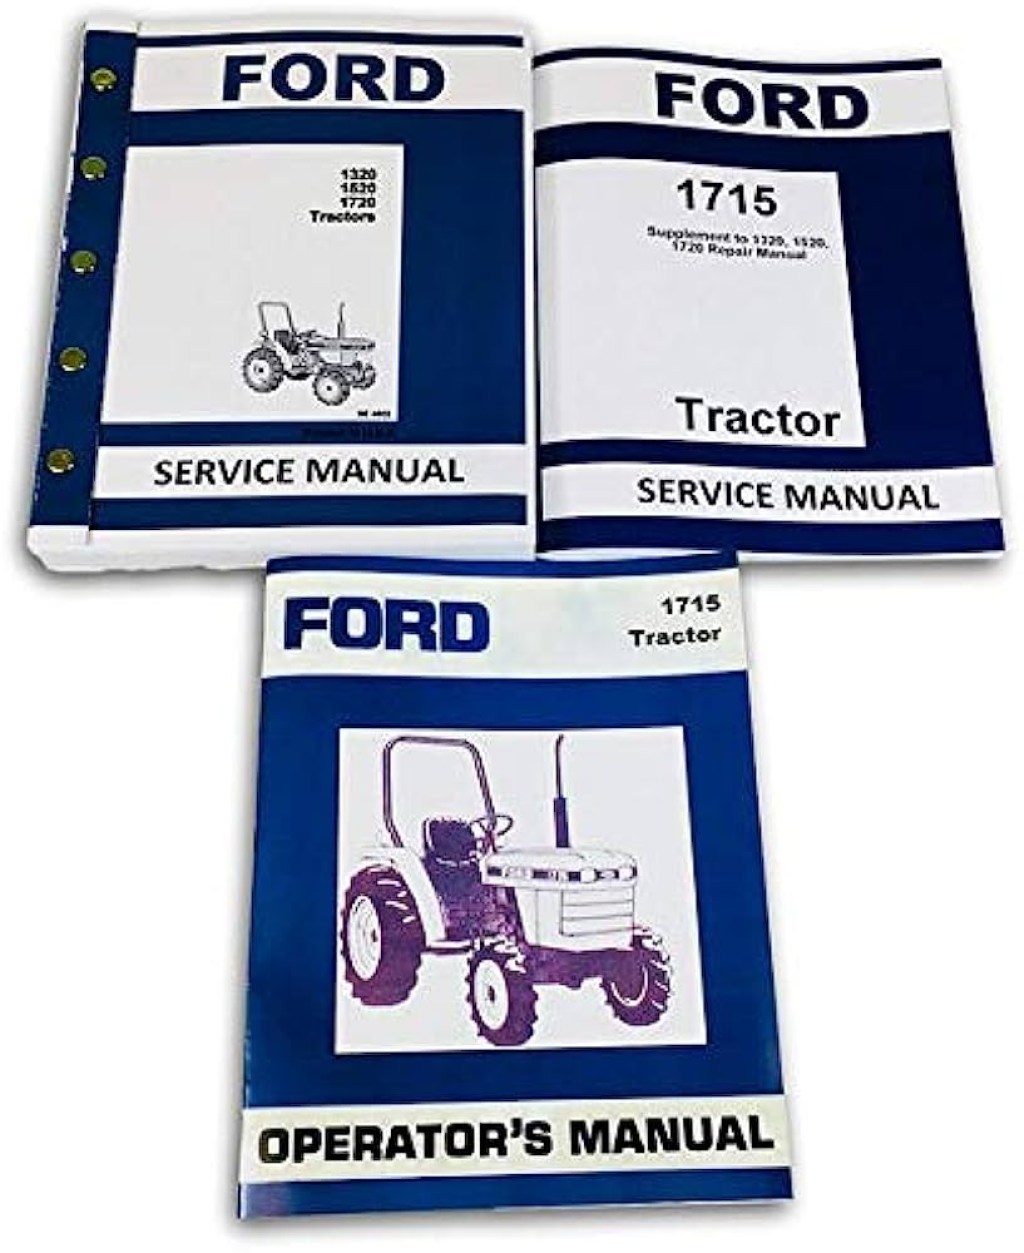 Picture of: Manual Set for Ford  Tractor Service Repair Owners Operators Shop  Technical